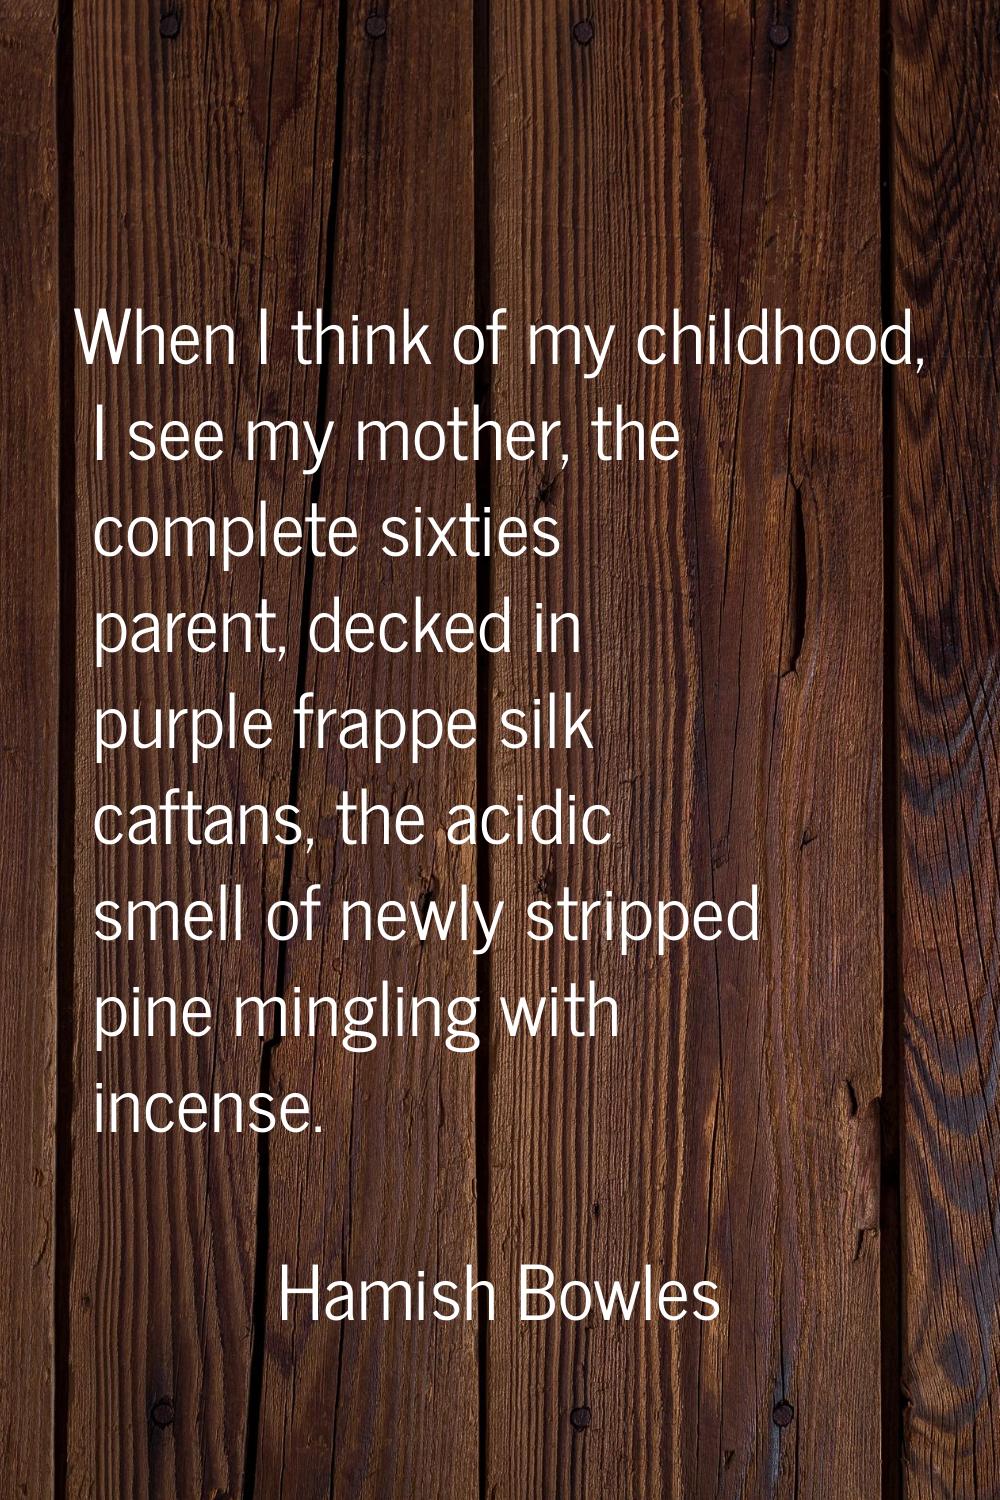 When I think of my childhood, I see my mother, the complete sixties parent, decked in purple frappe